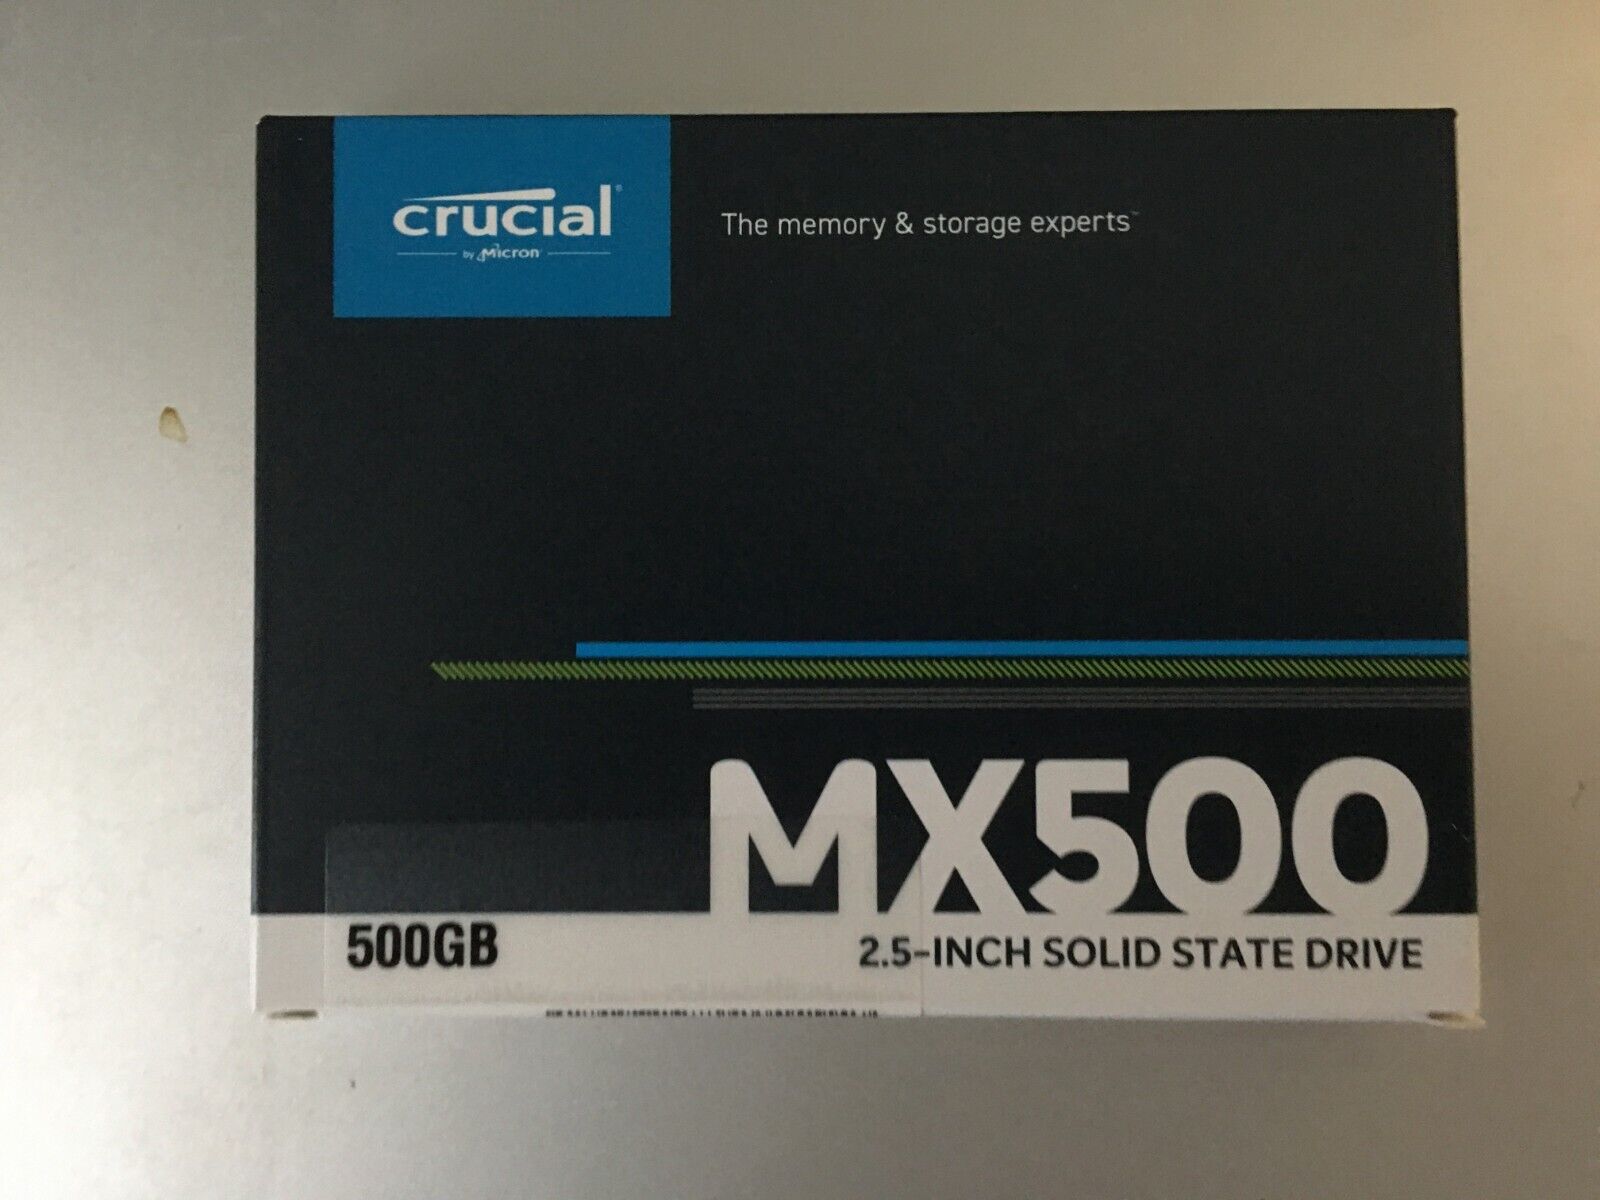 Crucial 500GB 2.5 Inch Solid State Drive MX500, New